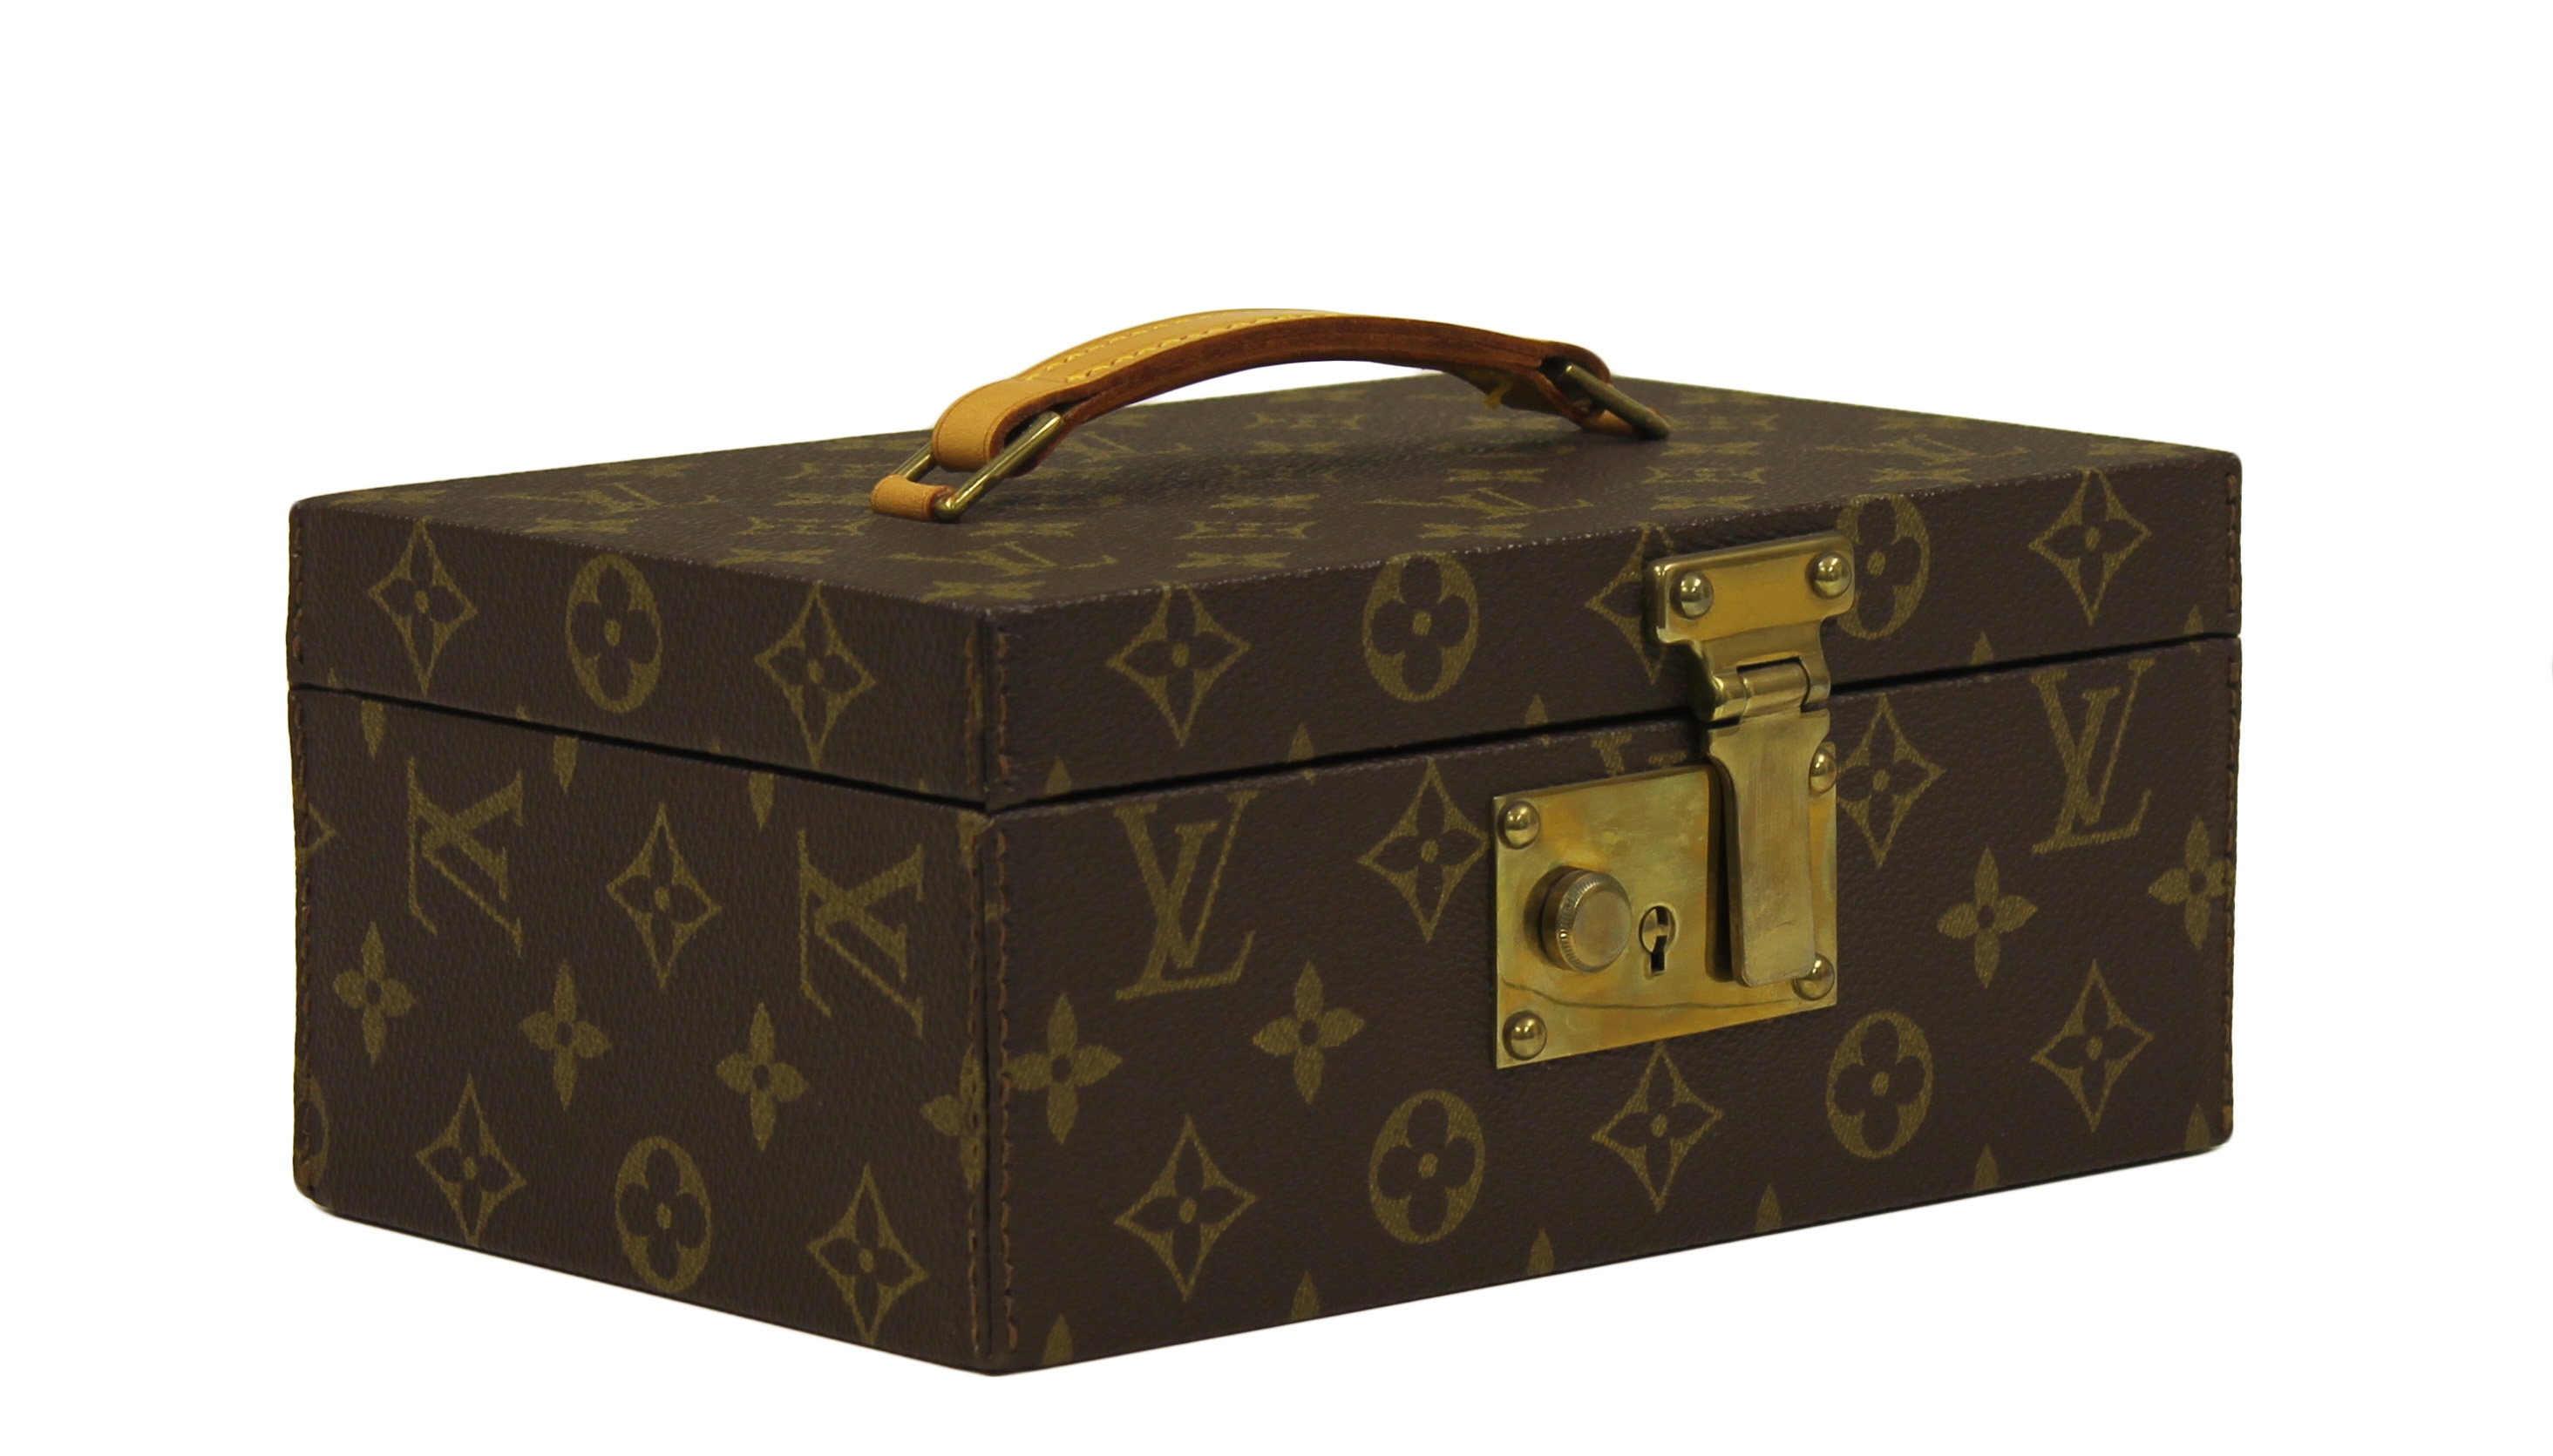 Authenticated Used Louis Vuitton Monogram Trunk Jewelry Box Case